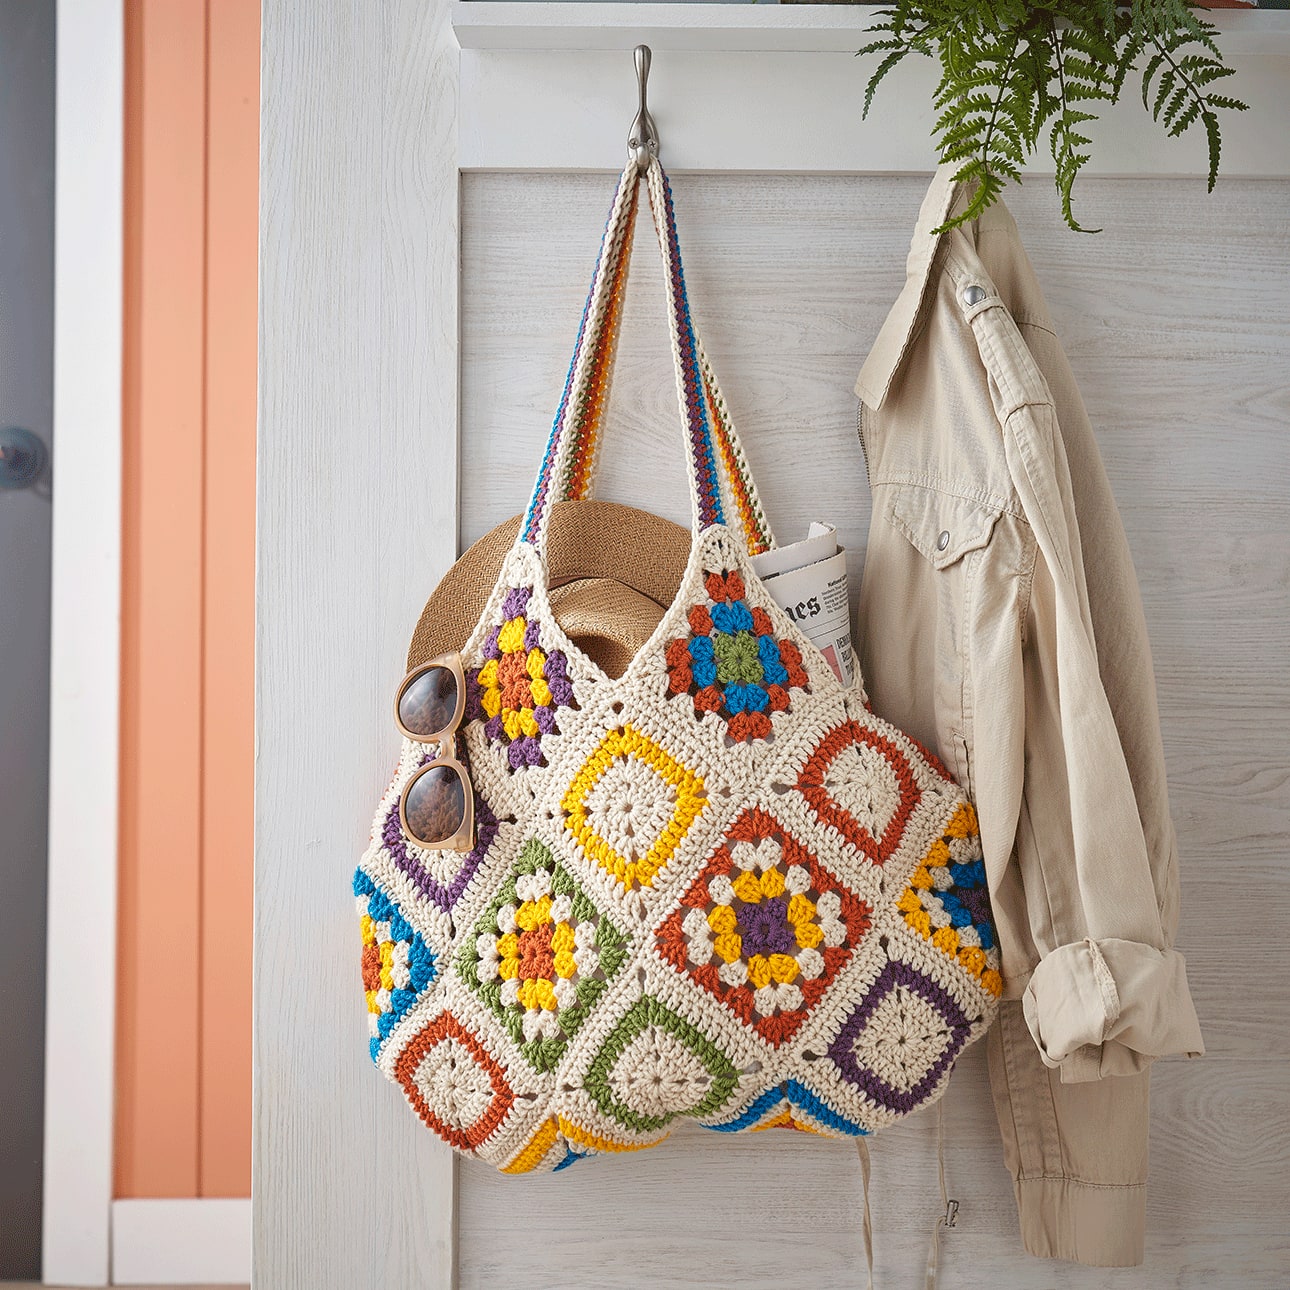 Crochet Specia Bag mix of Leather and Yarn for a Charming 